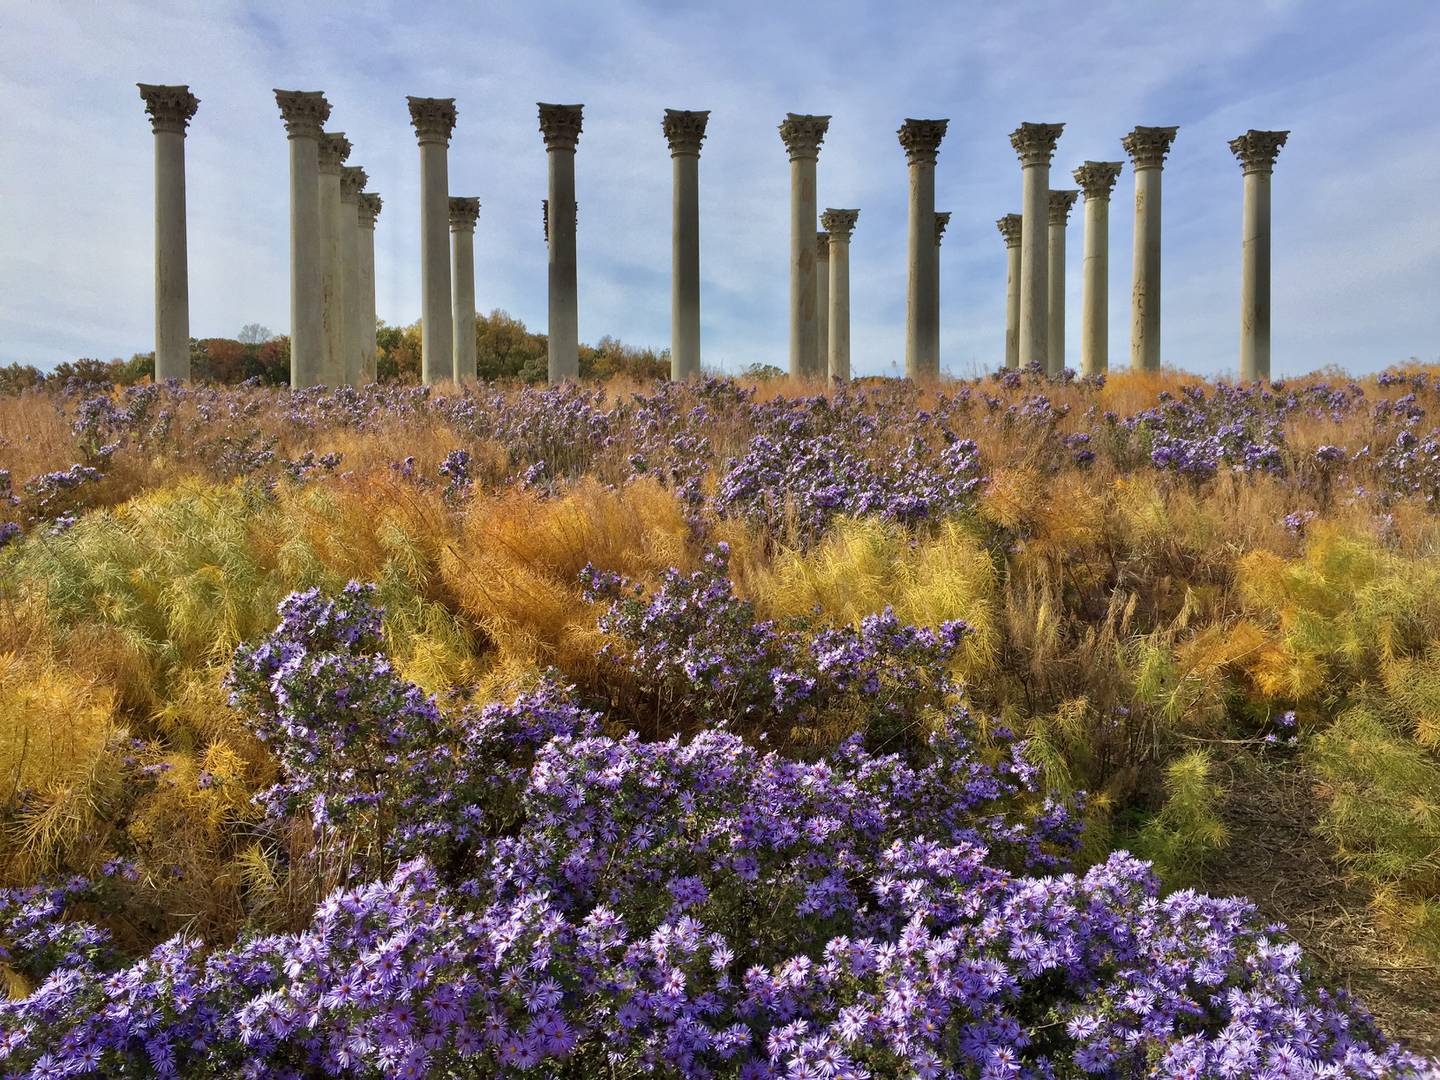 To see what a plant will look like in maturity, there's no better resource than the National Arboretum in Washington, D.C., where the modern movement towards meadows and naturalistic plantings is on full display.